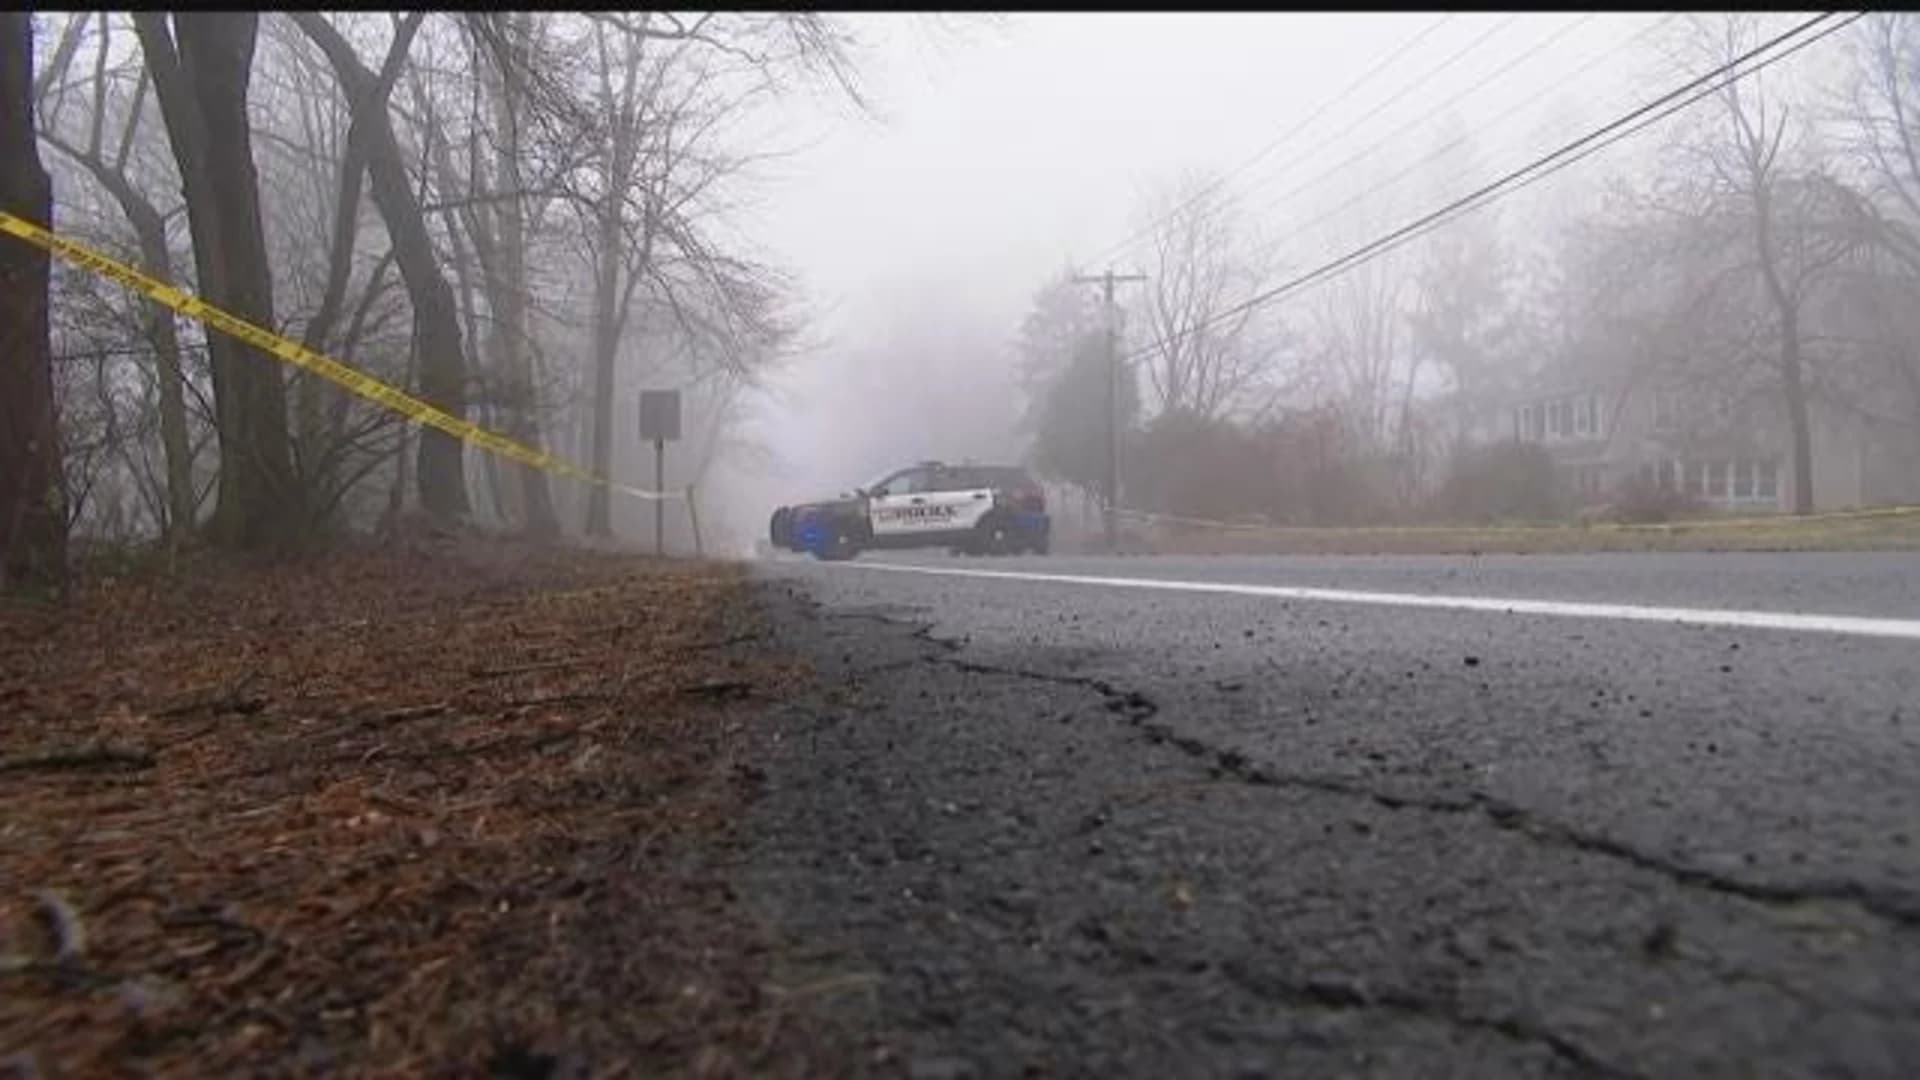 Police: Body found on road in Woodbridge